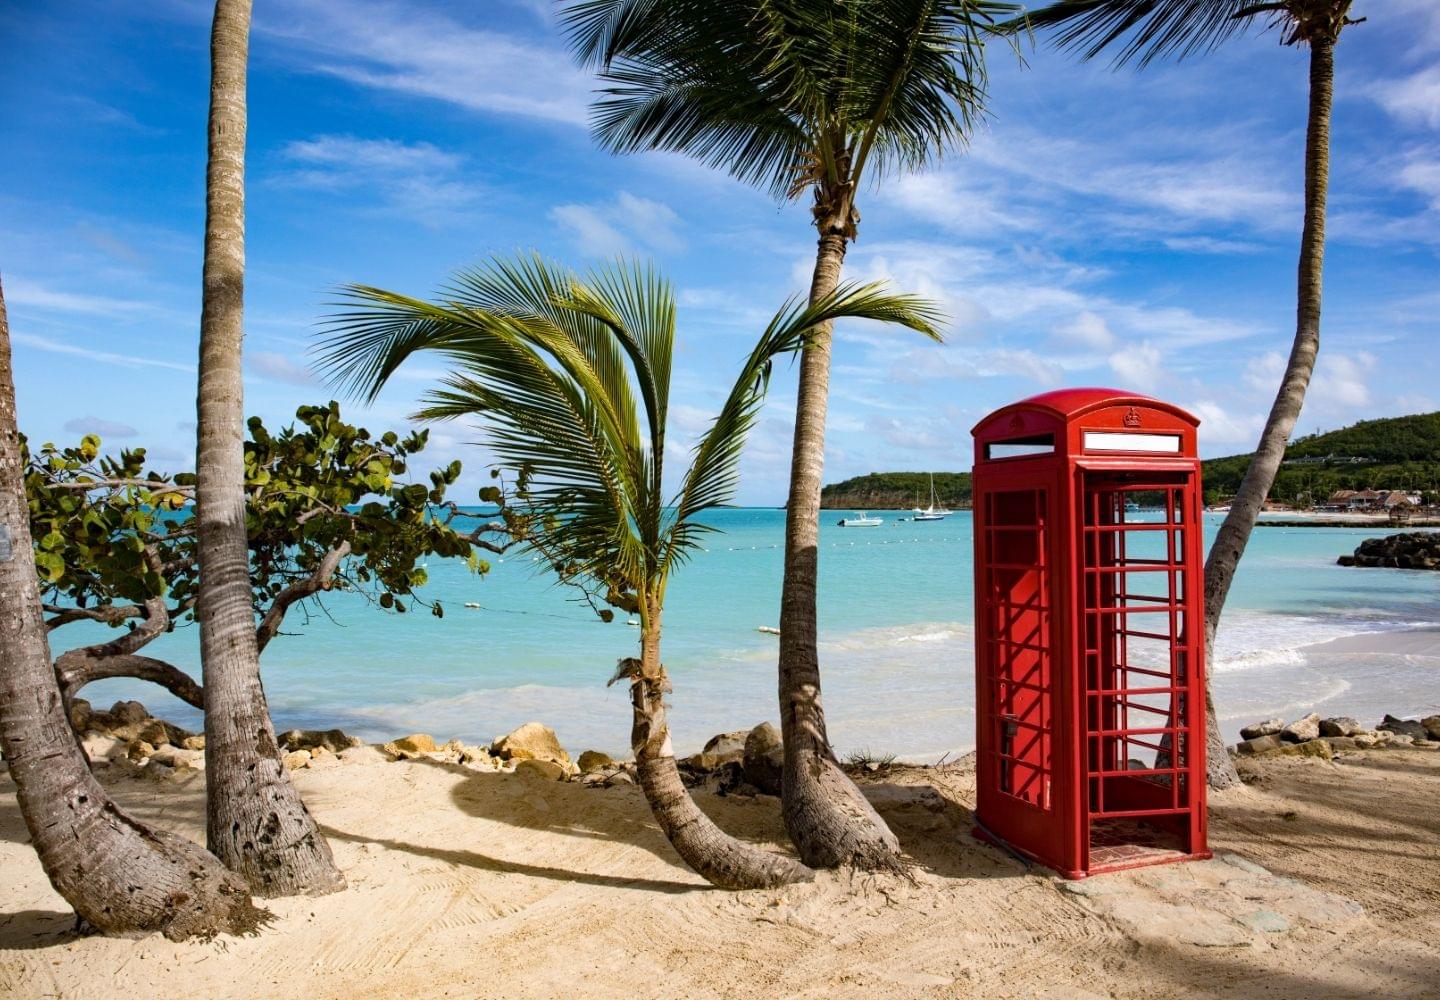 dickenson bay beach with red phone booth